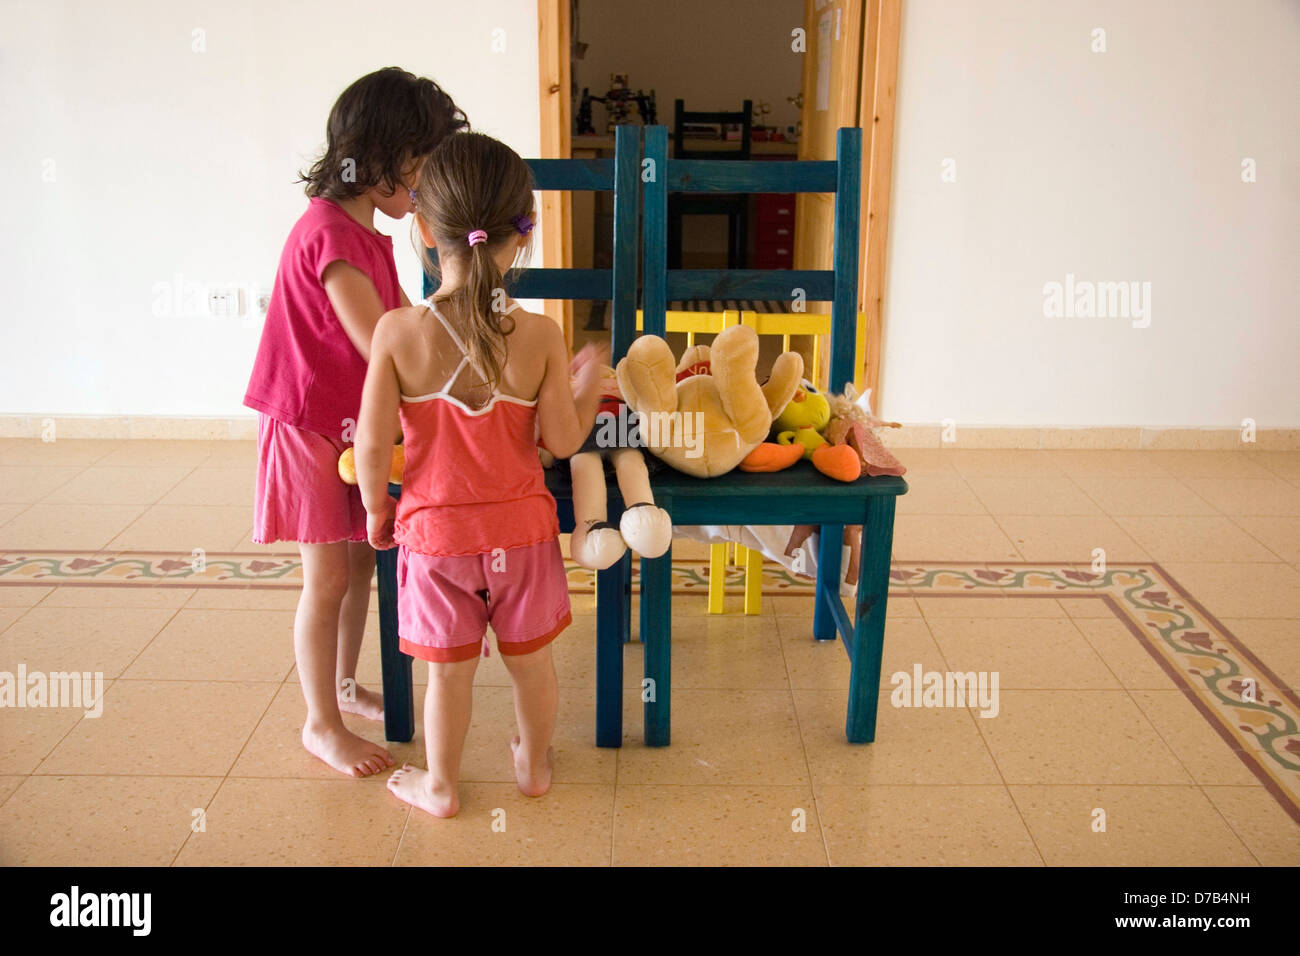 girls playing with dolls Stock Photo